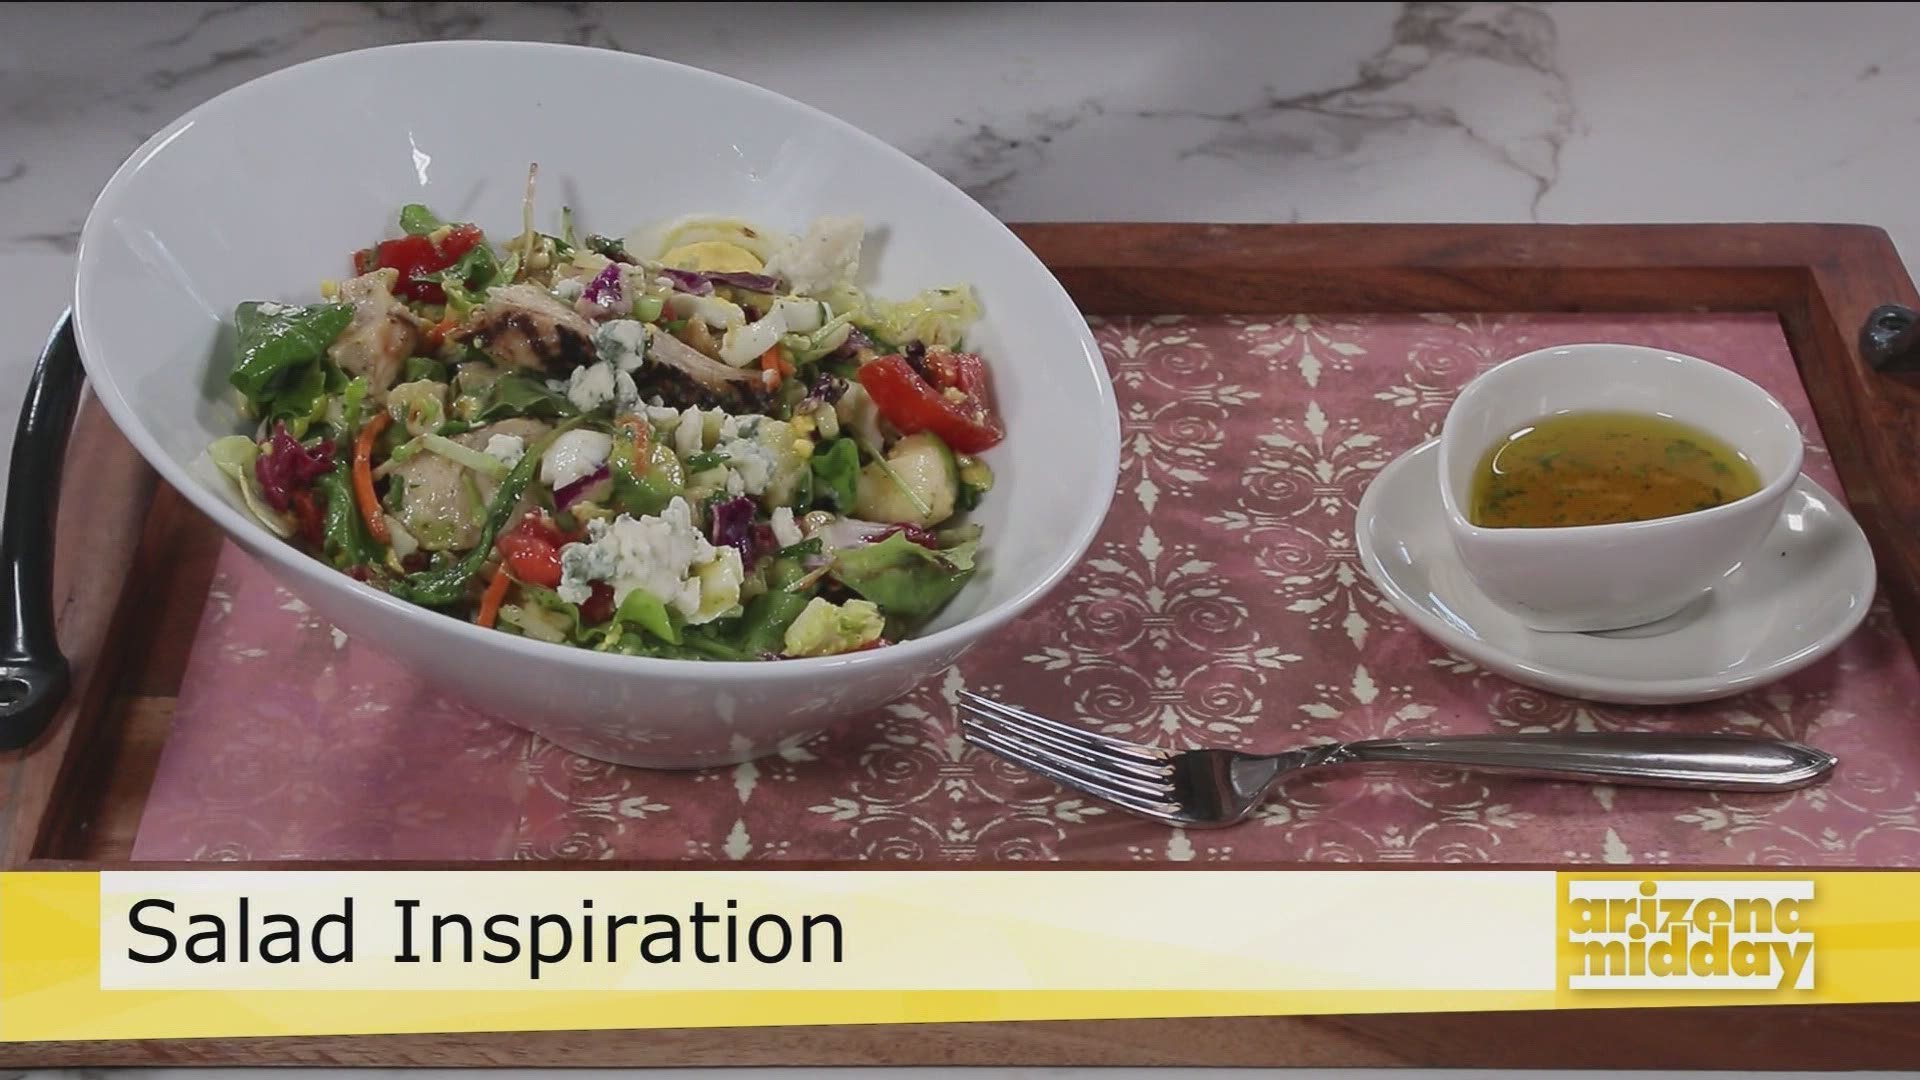 Jan D'Atri has the recipe for a salad with cilantro and lime dressing perfect for a meal!